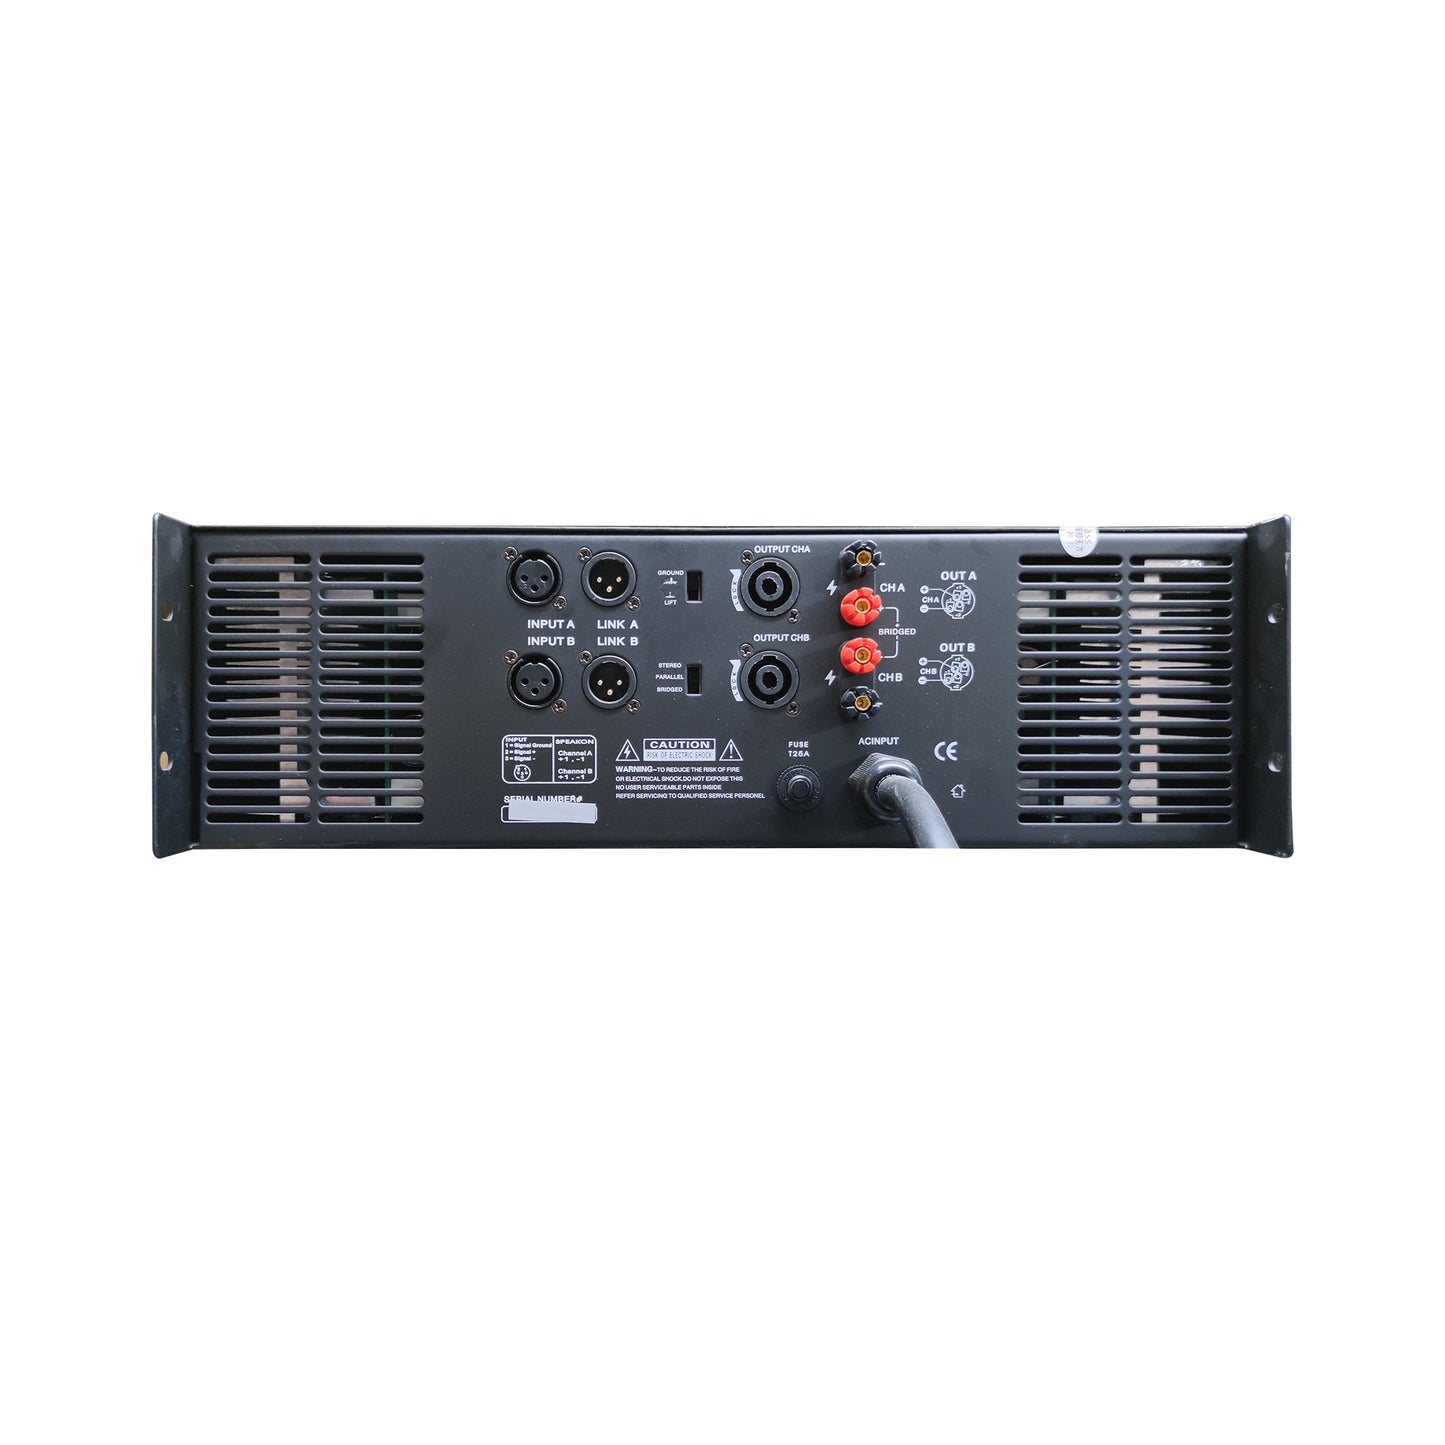 KEVLER MC2 1500W Professional Power Amplifier with Balance XLR Input, LED Indicators, Stereo, Parallel and Bridge Mode Selection, Speakon and Binding Post Output and Dual Variable Speed Fans